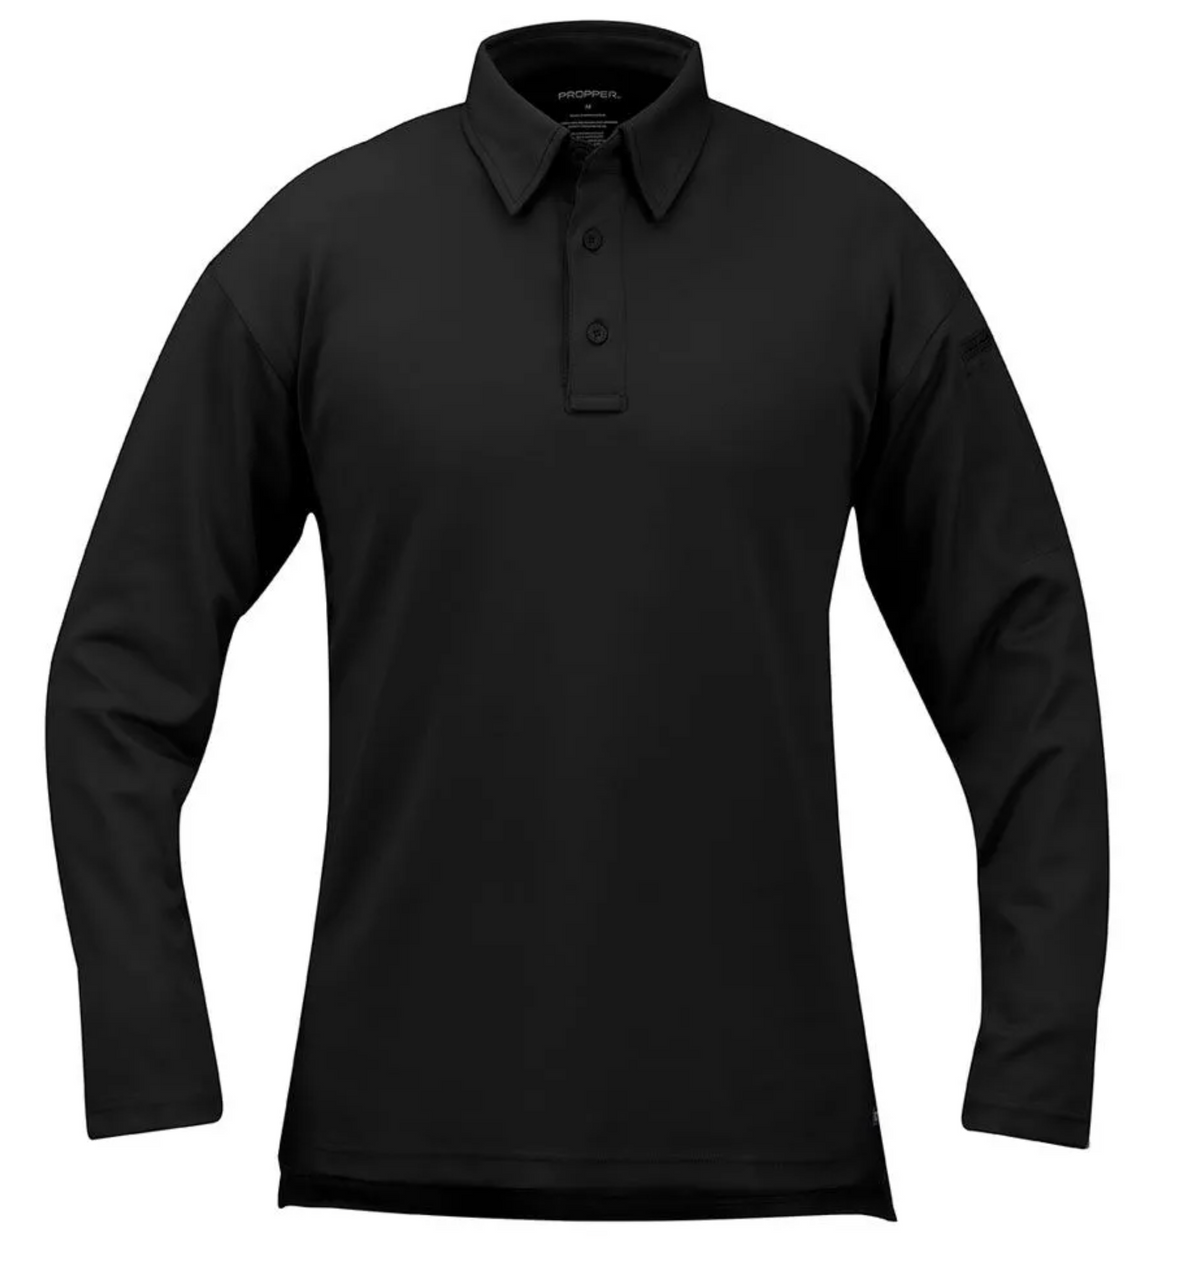 Propper Kinetic Shirt Long Sleeve with NEXStretch Technology - SGT TROYS